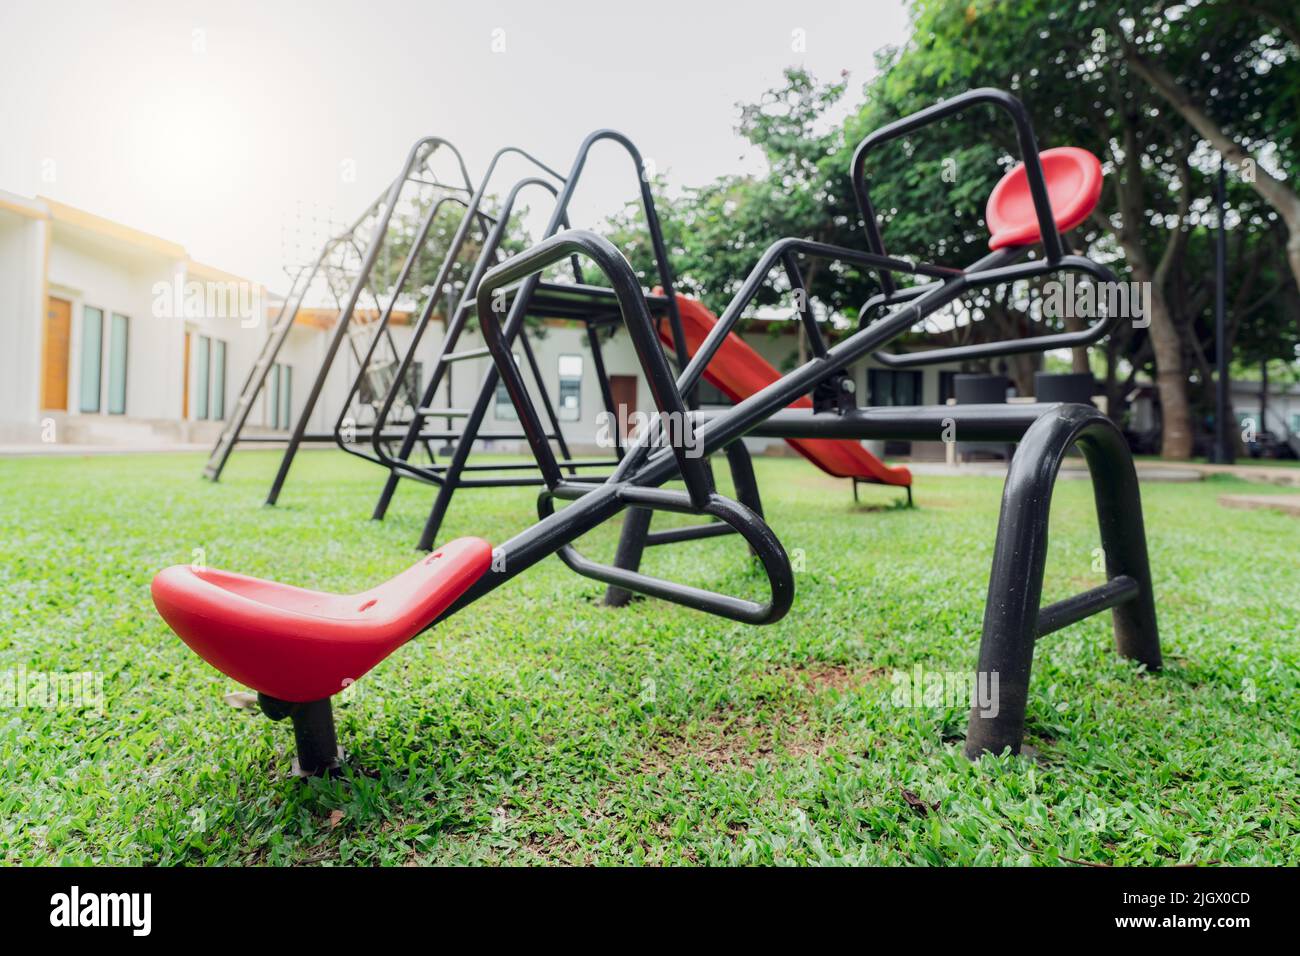 Red seesaw in the playground. Playground equipment for children to play. Plastic seesaw or teeter-totter, swing, and slide at outdoor playground Stock Photo